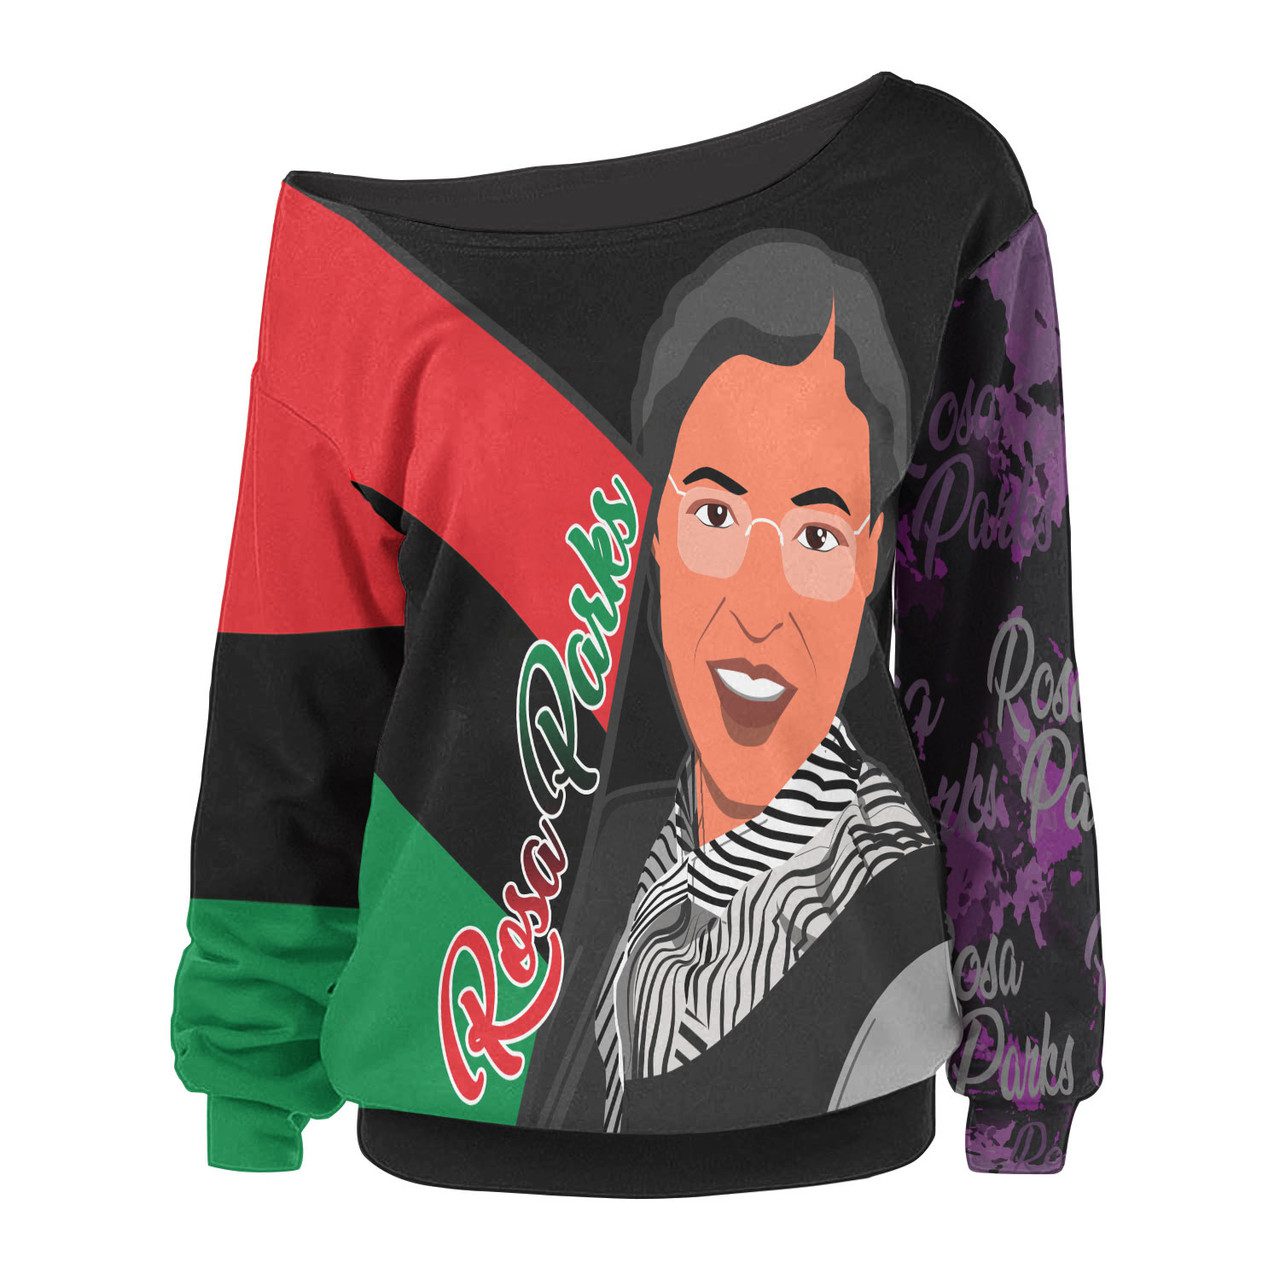 Black History Month Women Off Shoulder Sweater – Rosa Parks Civil Rights Leader With Pan Africa Flag